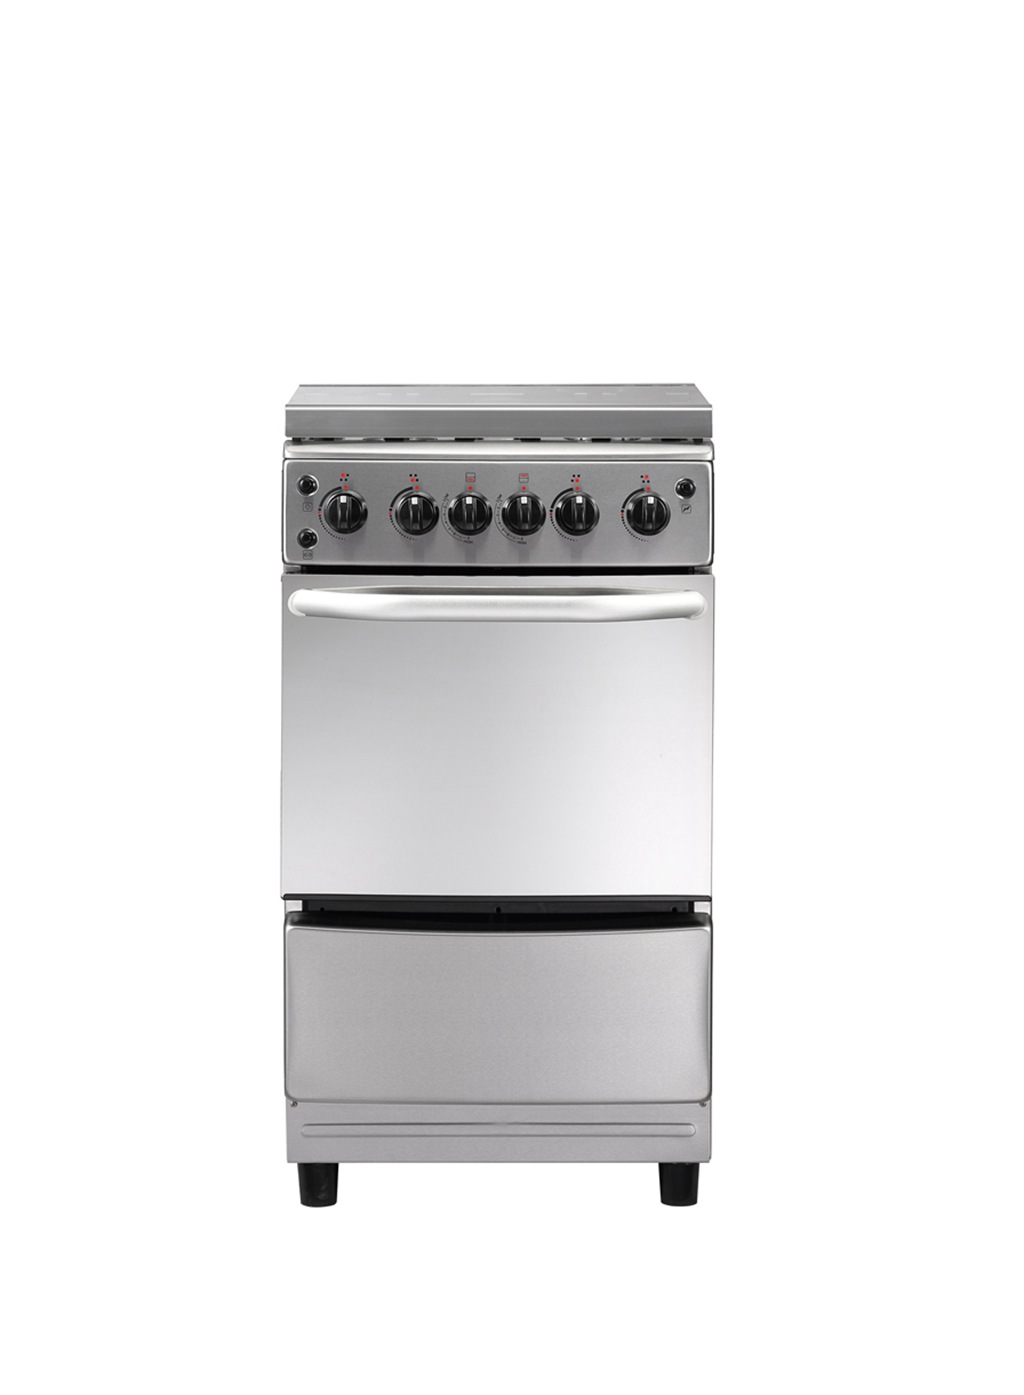 20 Inches Wide Freestanding 4 Burner Stainless Gas Oven